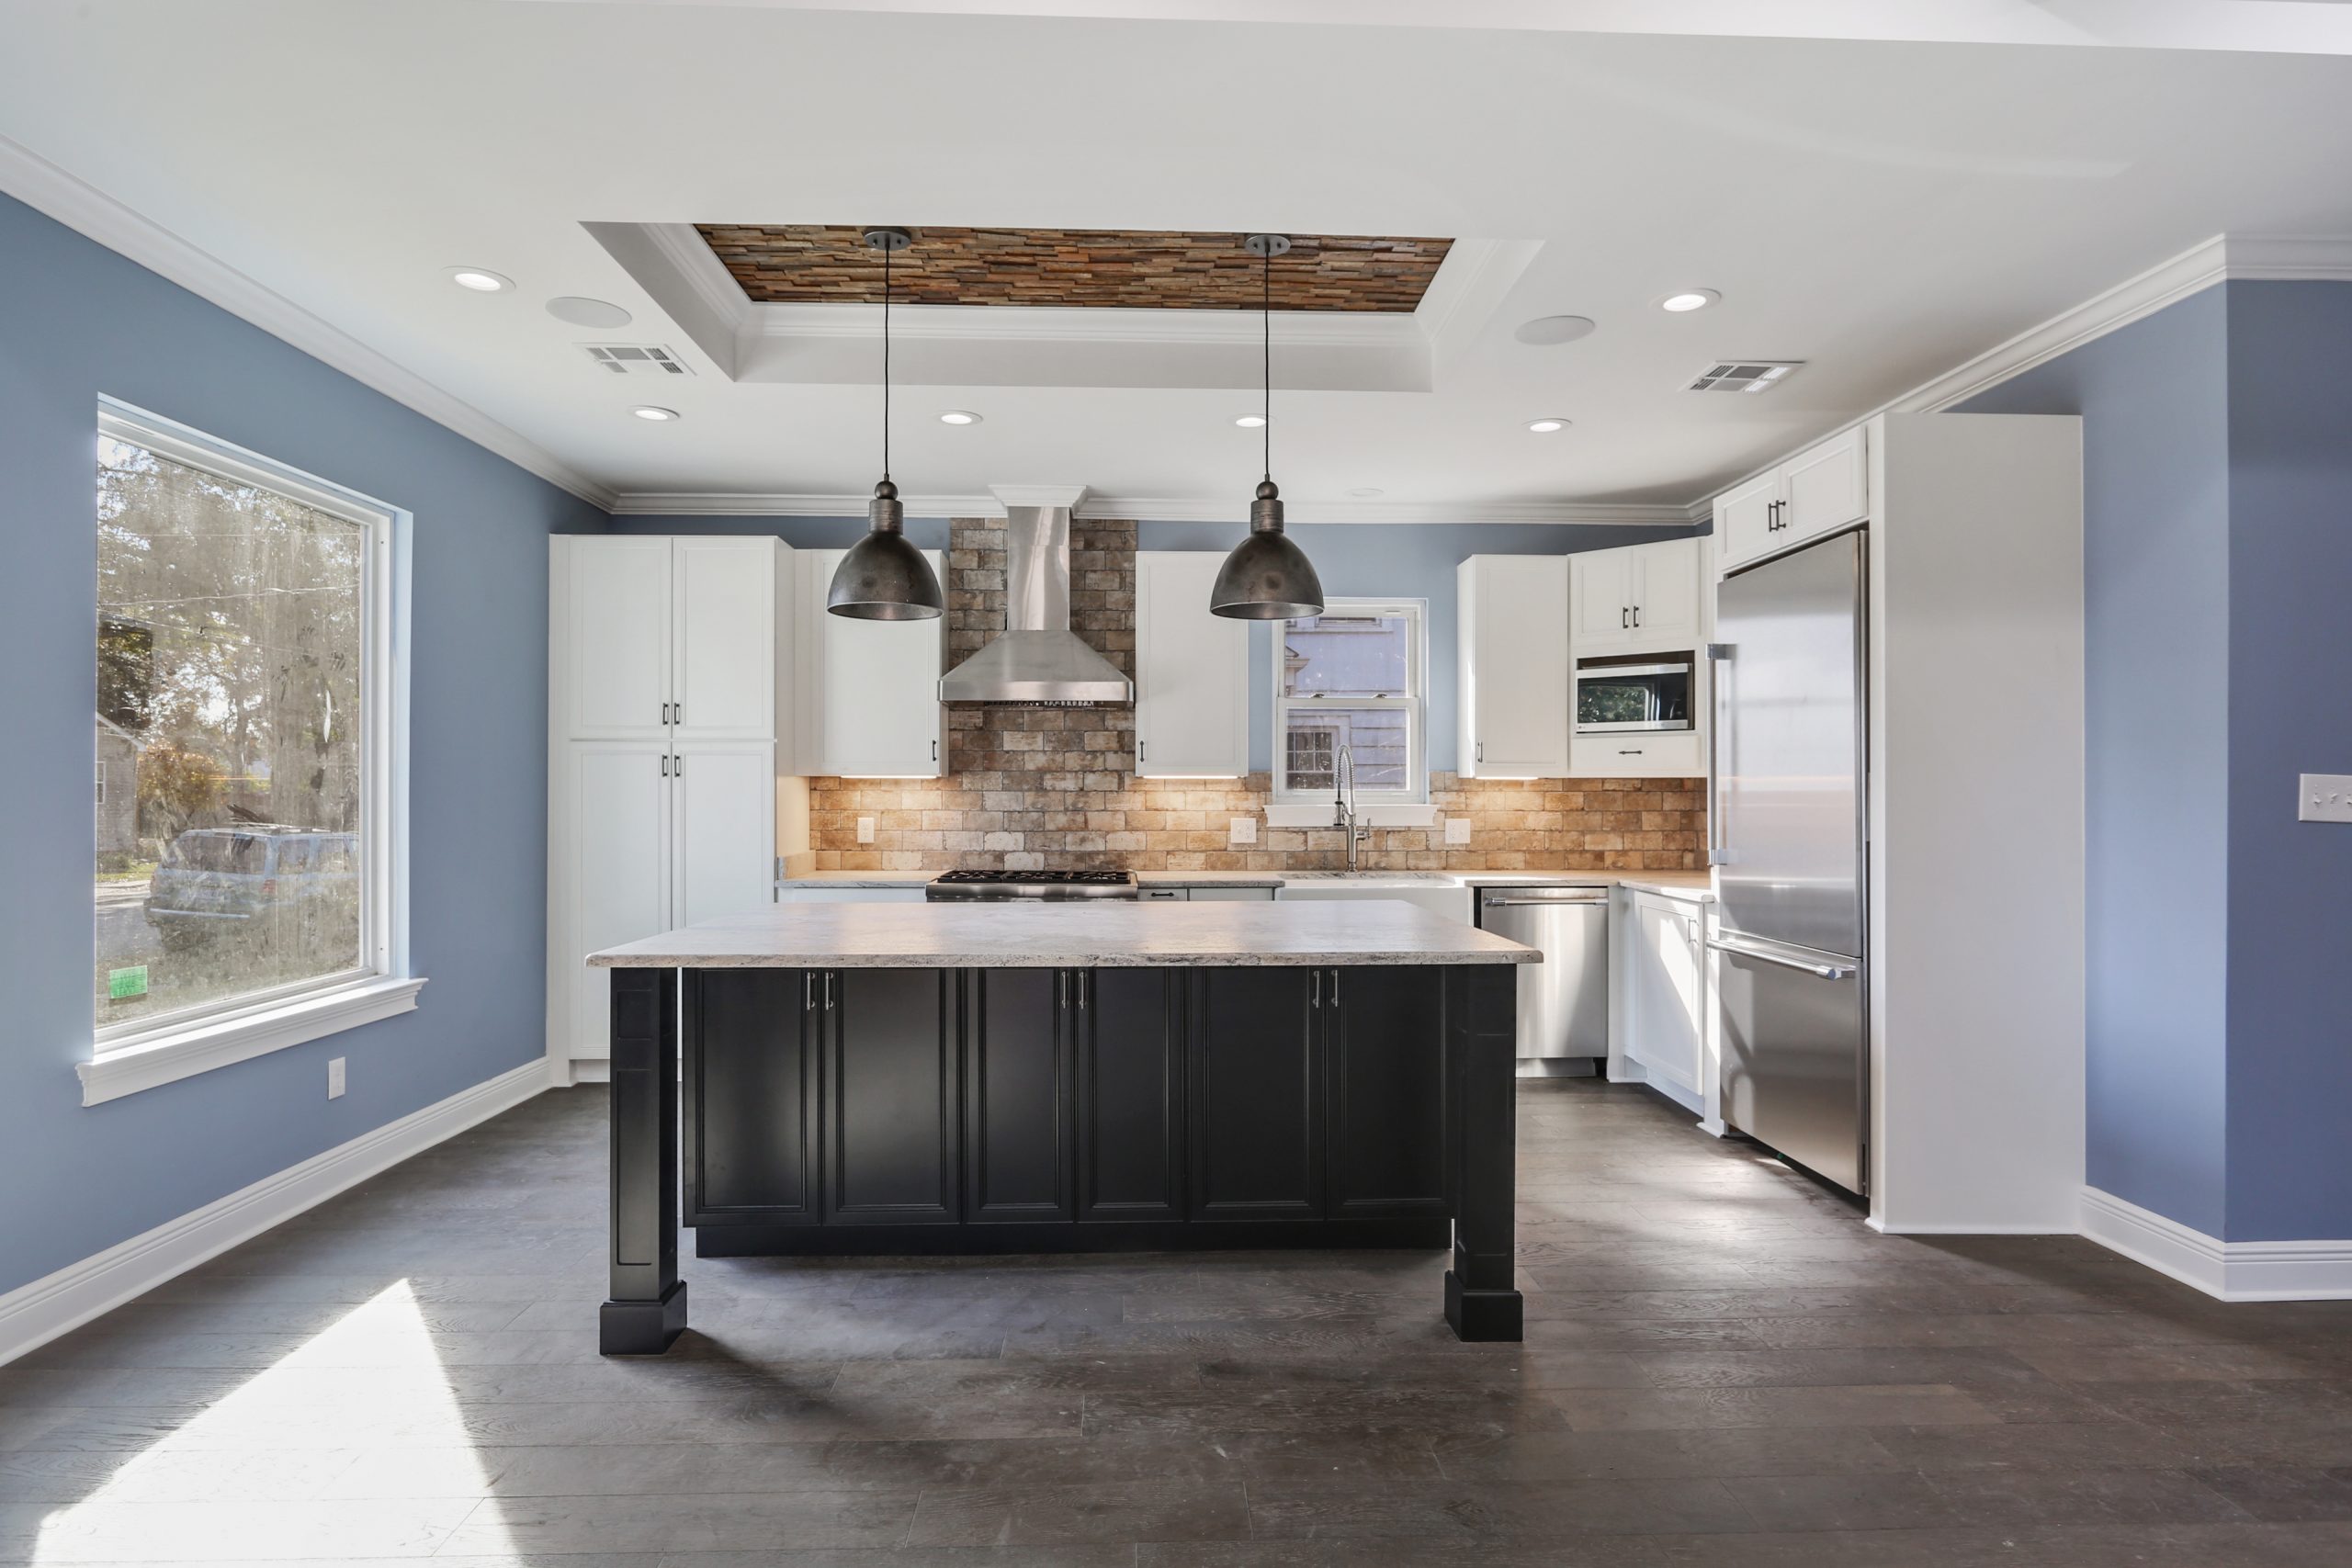 Athania House Luxury Kitchen Renovation designed and built by DMG Design+Build